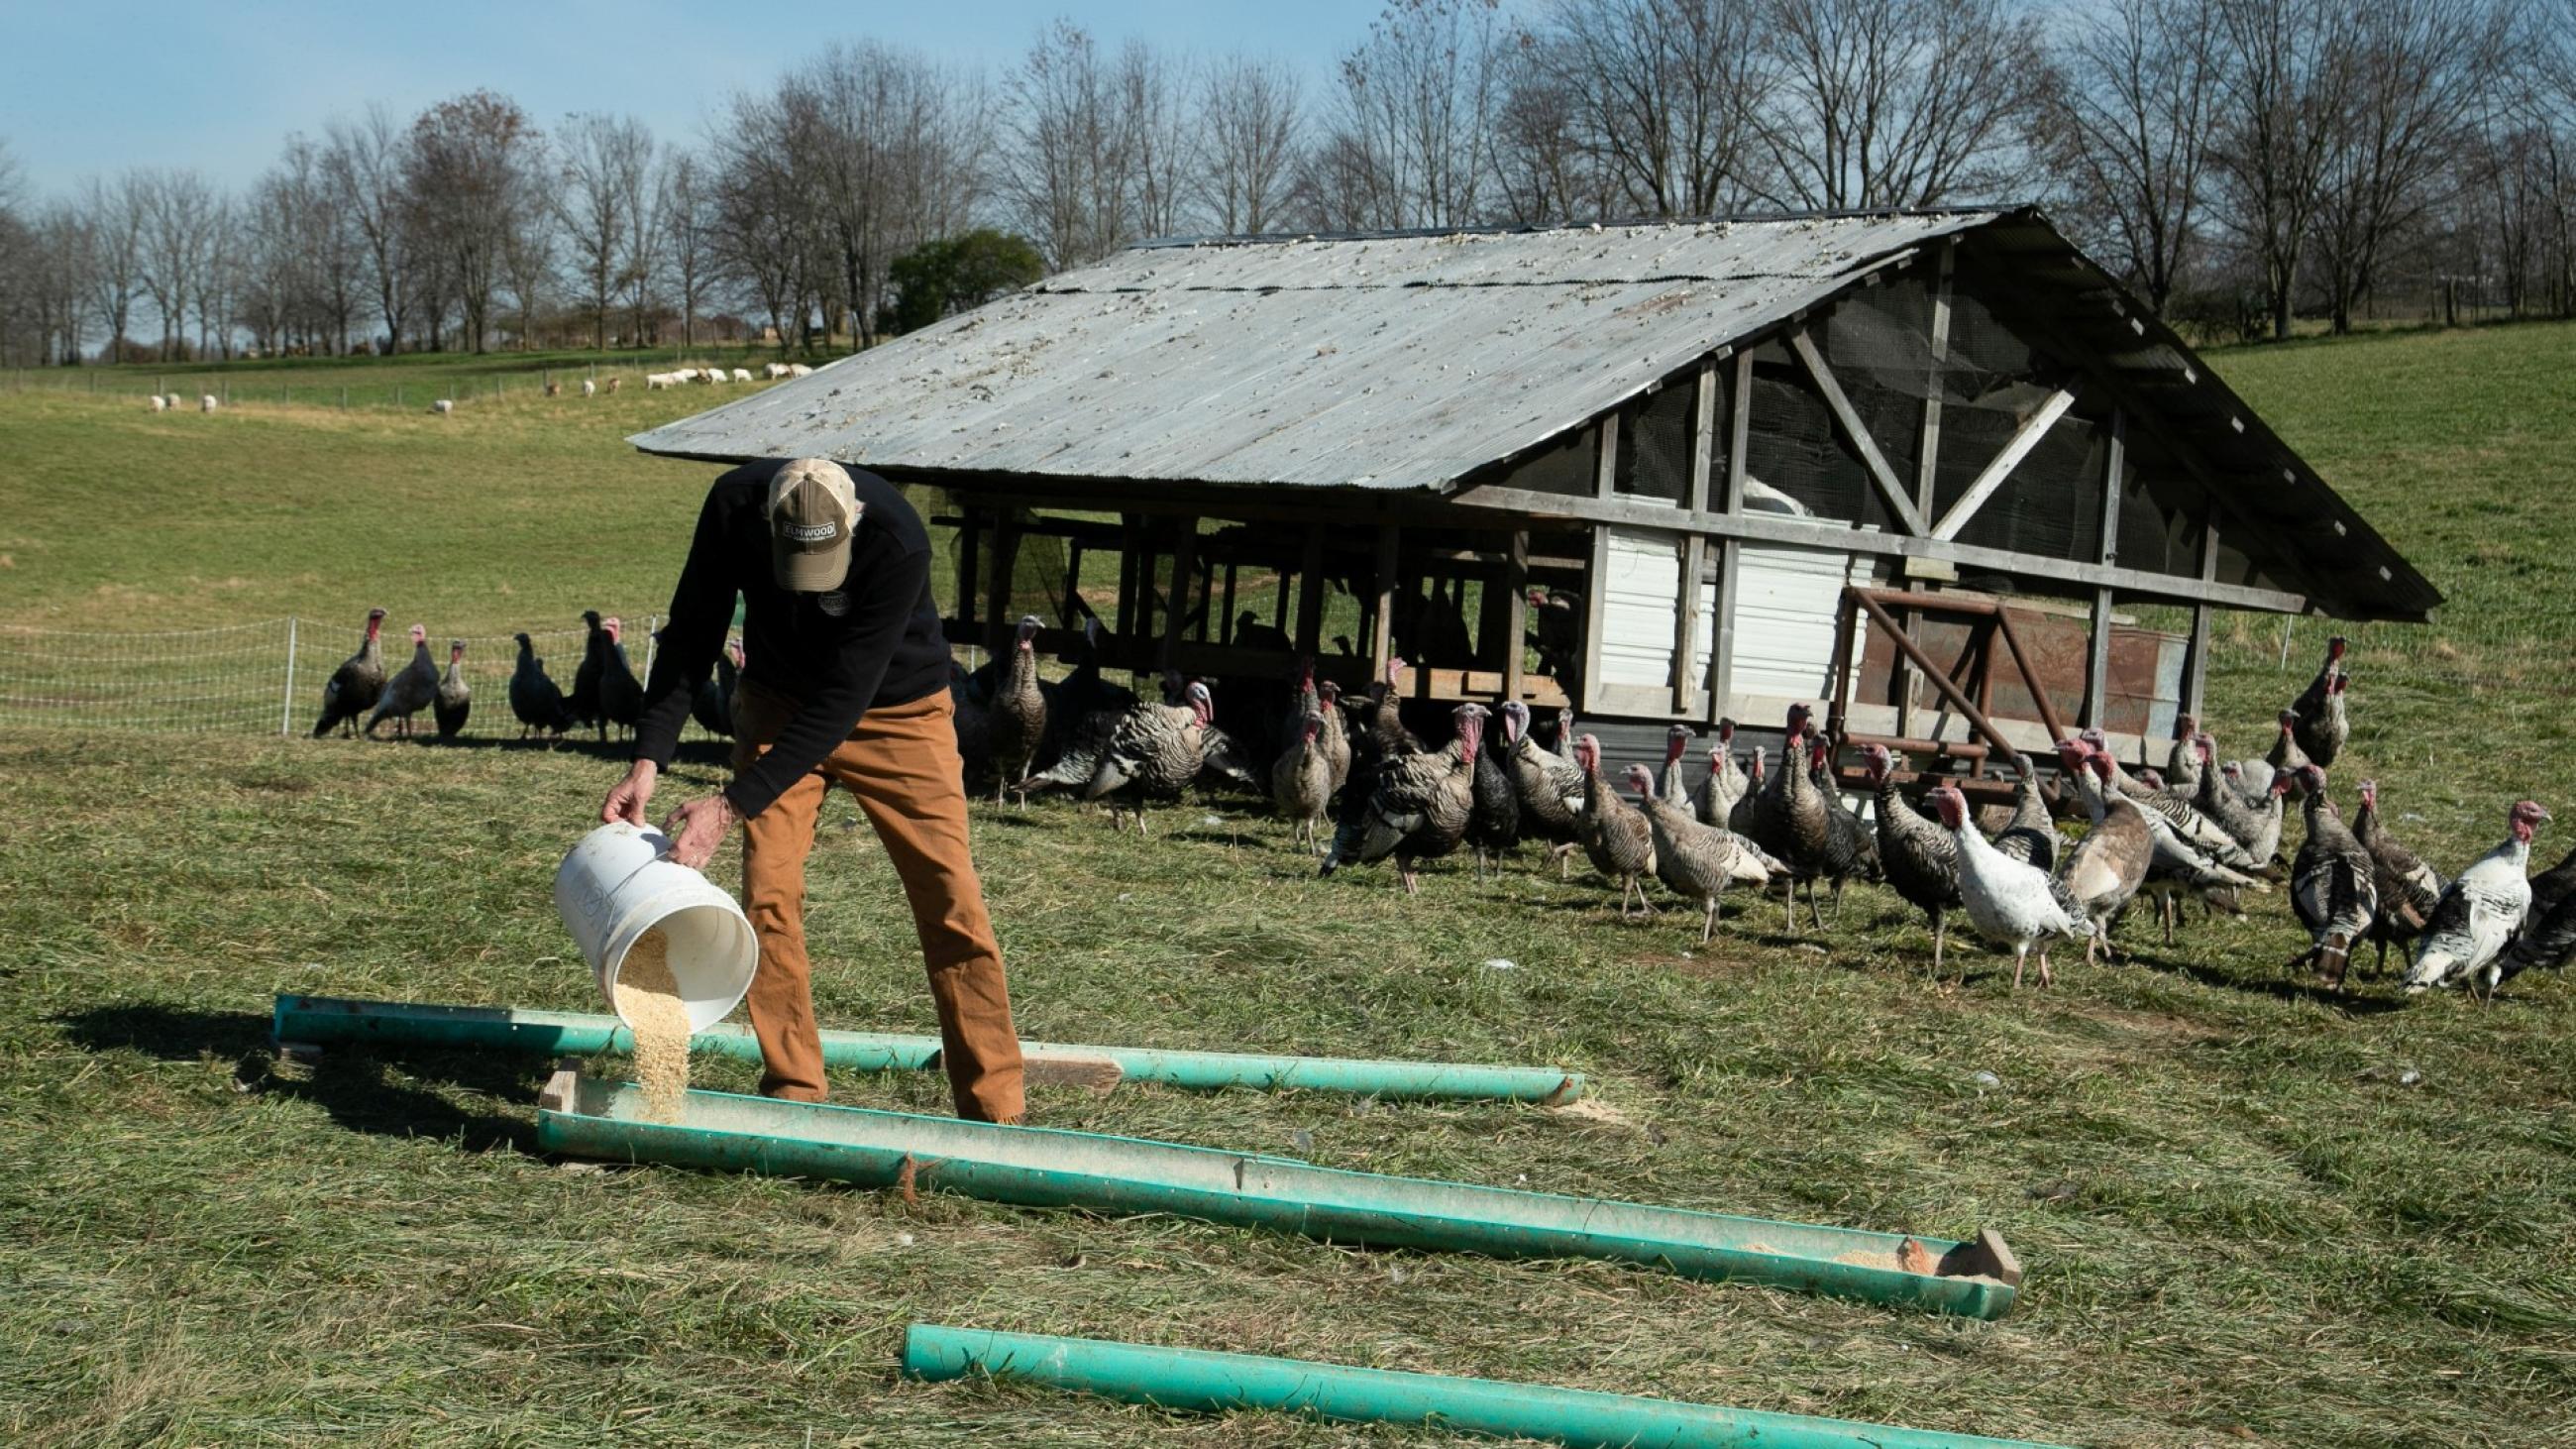 Mac Stone, owner of Elmwood Stock Farm, fills out feeders for heritage turkeys ahead of the Thanksgiving holiday in Georgetown, Kentucky, on November 16, 2021